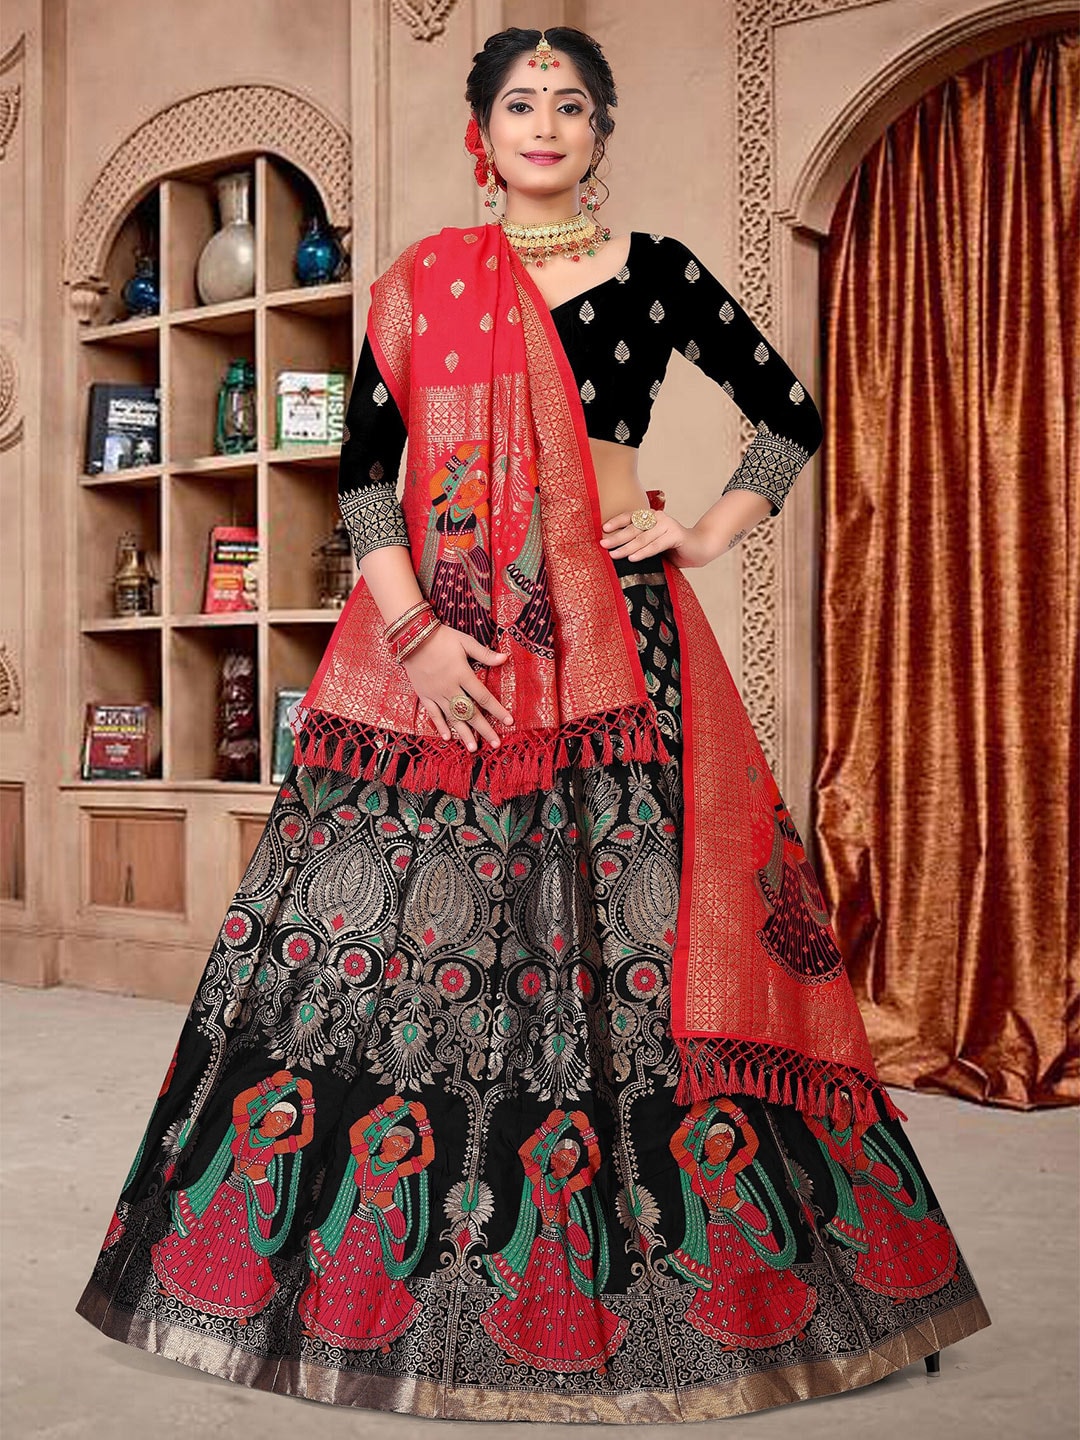 KALINI Woven Design Semi-Stitched Lehenga & Unstitched Blouse With Dupatta Price in India